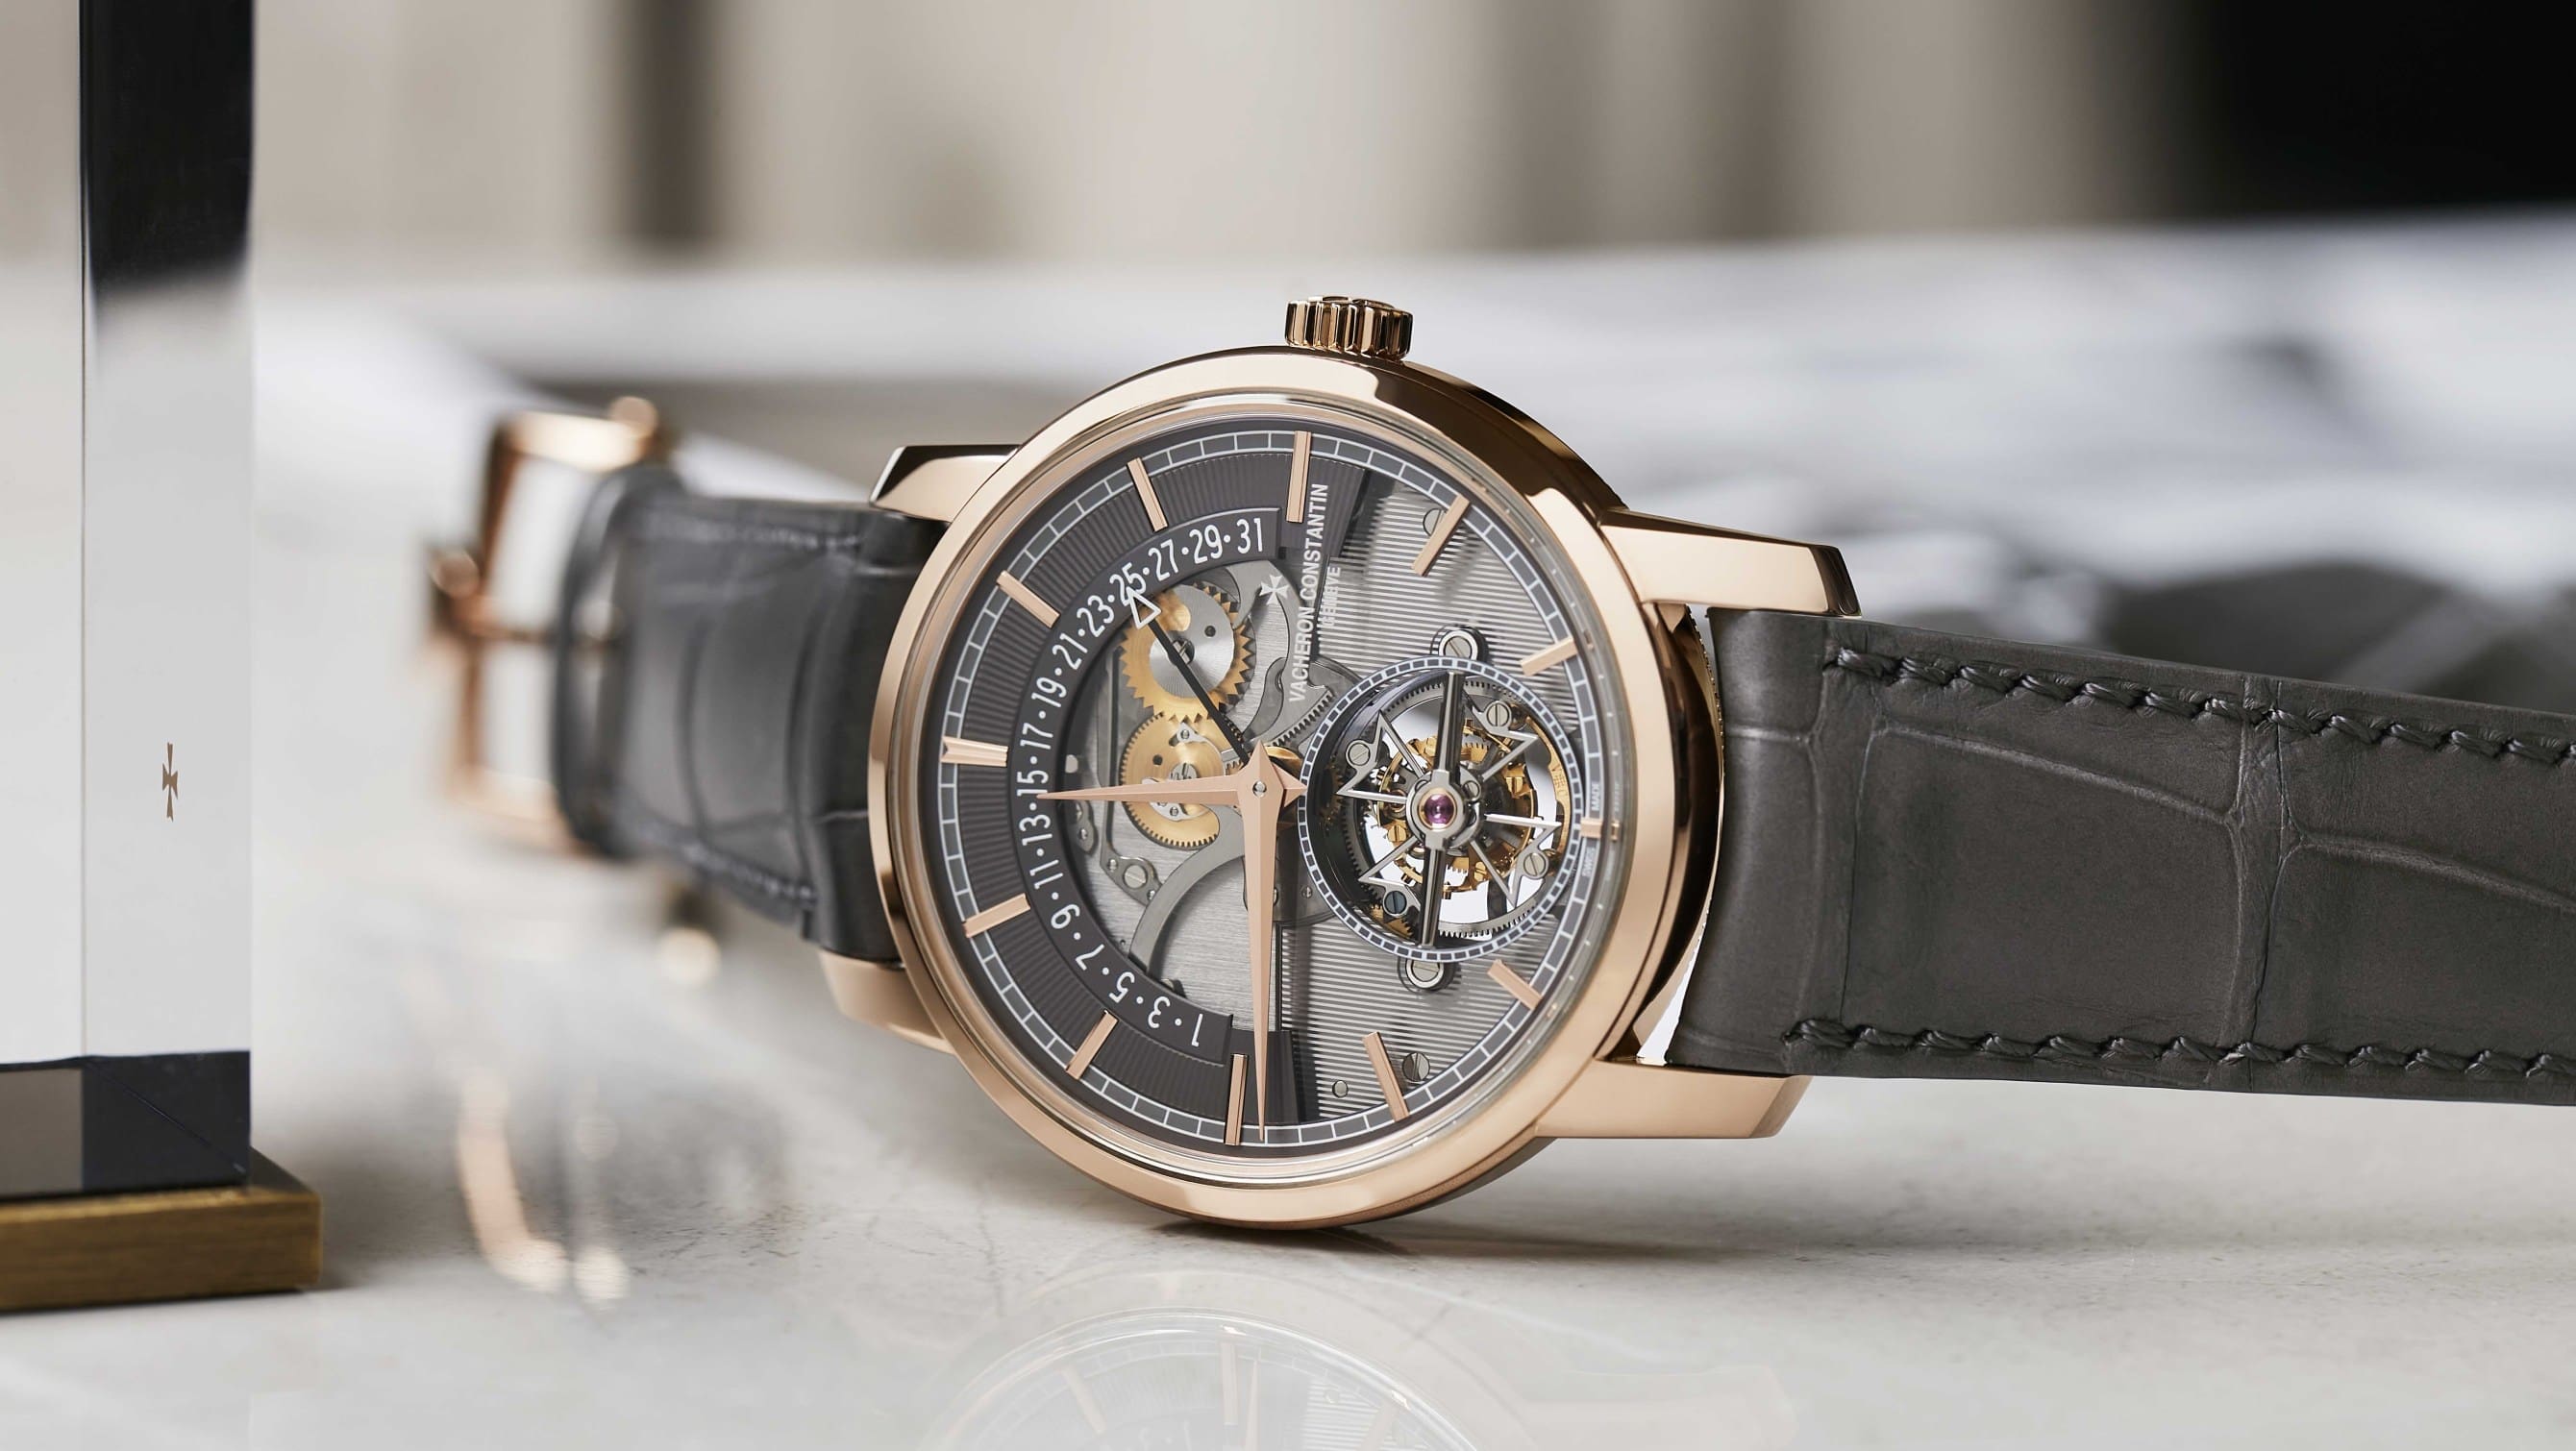 The Vacheron Constantin Traditionnelle Tourbillon Retrograde Date Openface blends classic complications with modern execution